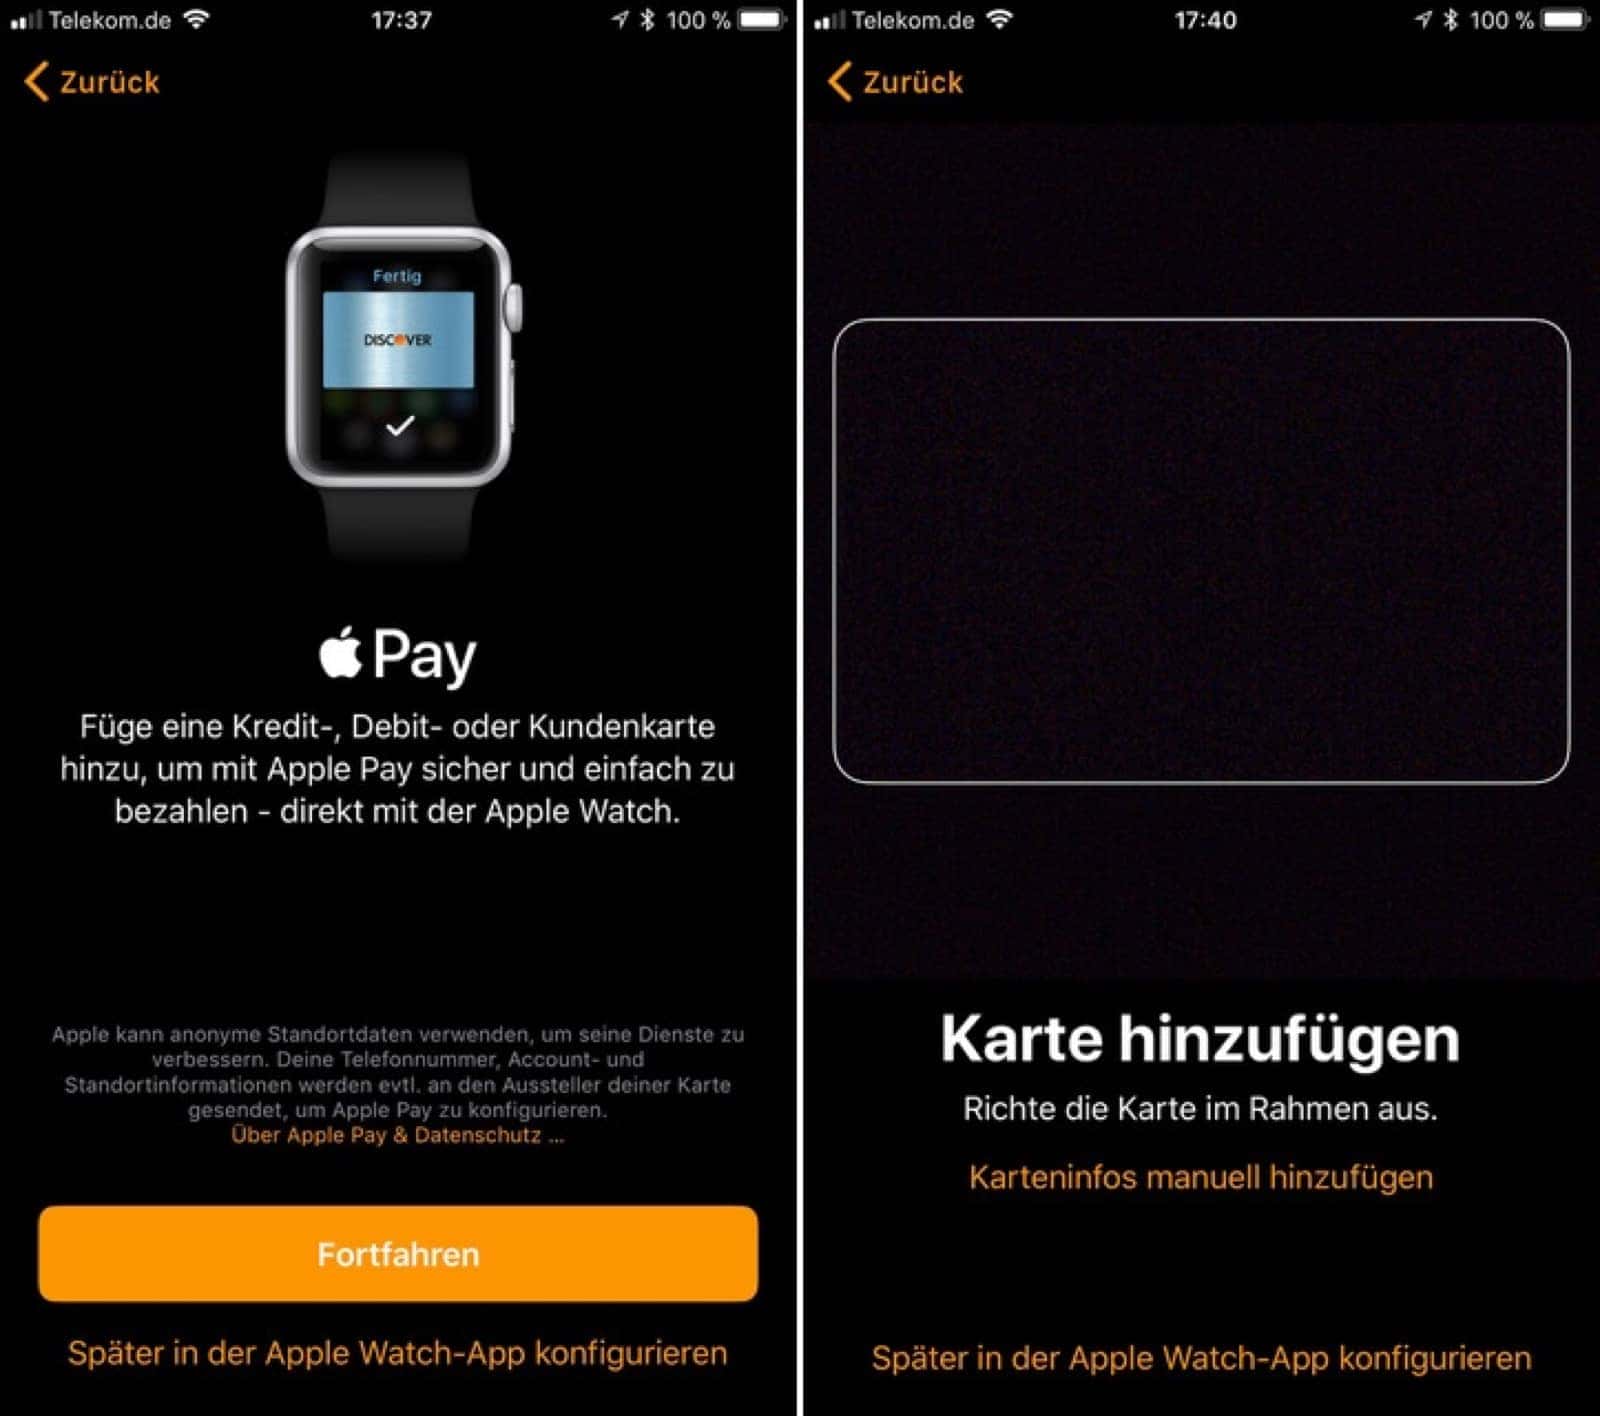 Apple Pay coming to Germany soon based on iPhone screenshots